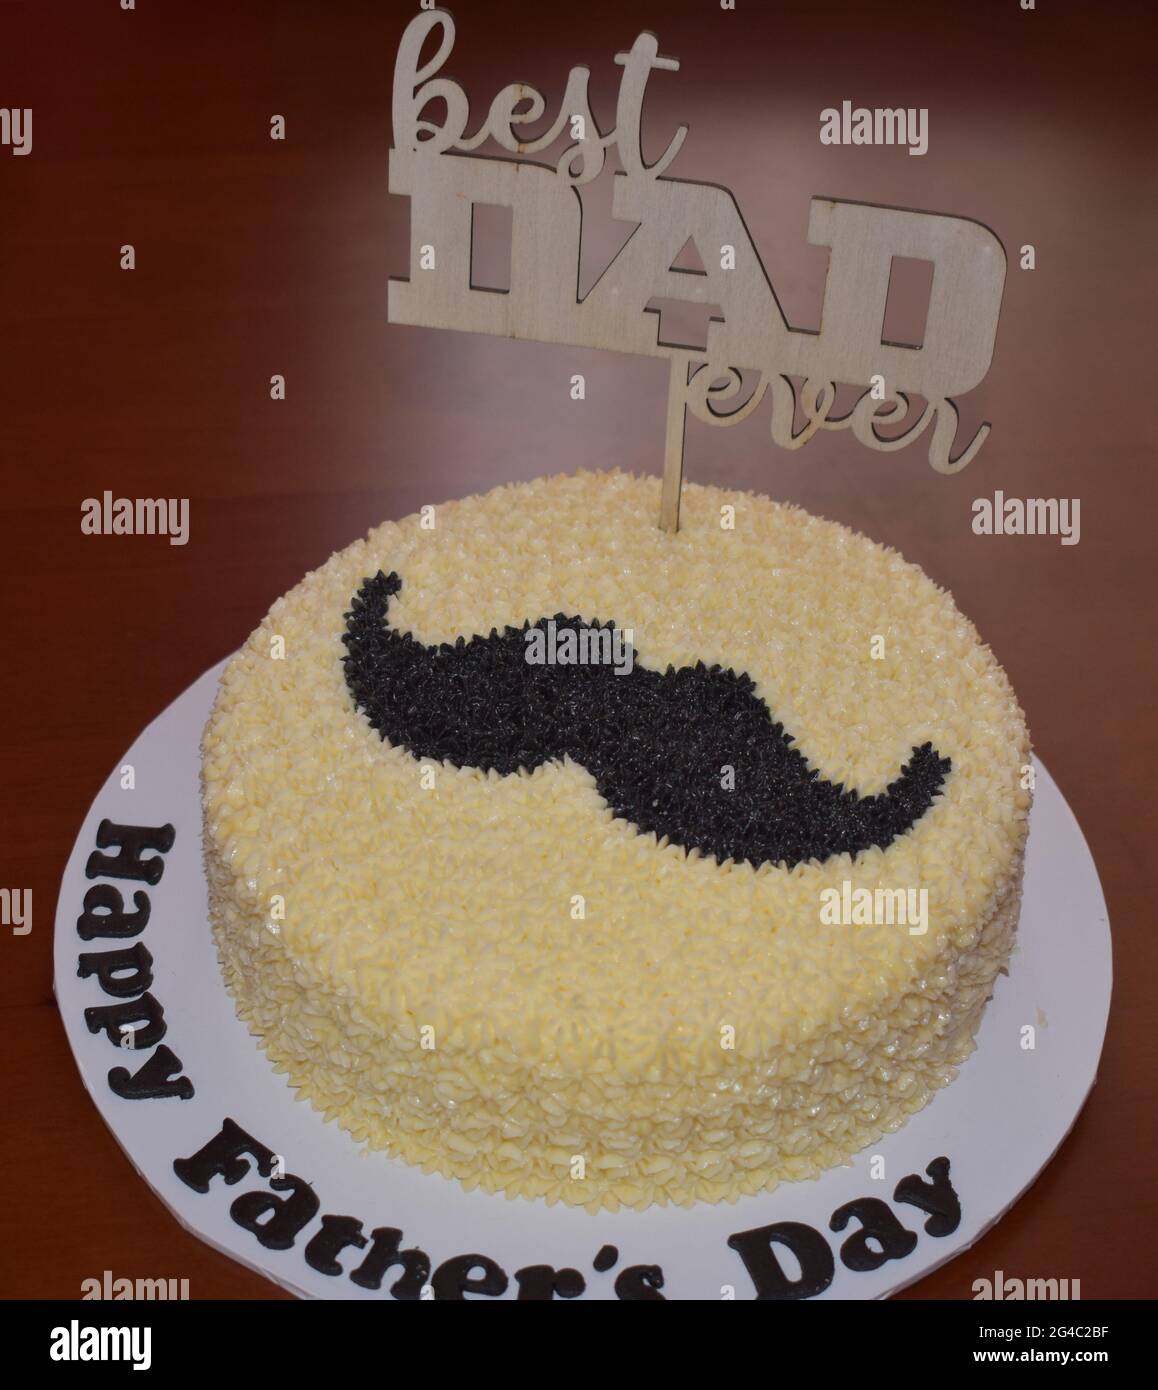 Colombo, Sri Lanka. 20th June 2021. A delicious looking Father’s day Cake. Father's Day is of honoring fatherhood and paternal bonds, as well as the influence of fathers in society. It is celebrated on the third Sunday of June. Stock Photo